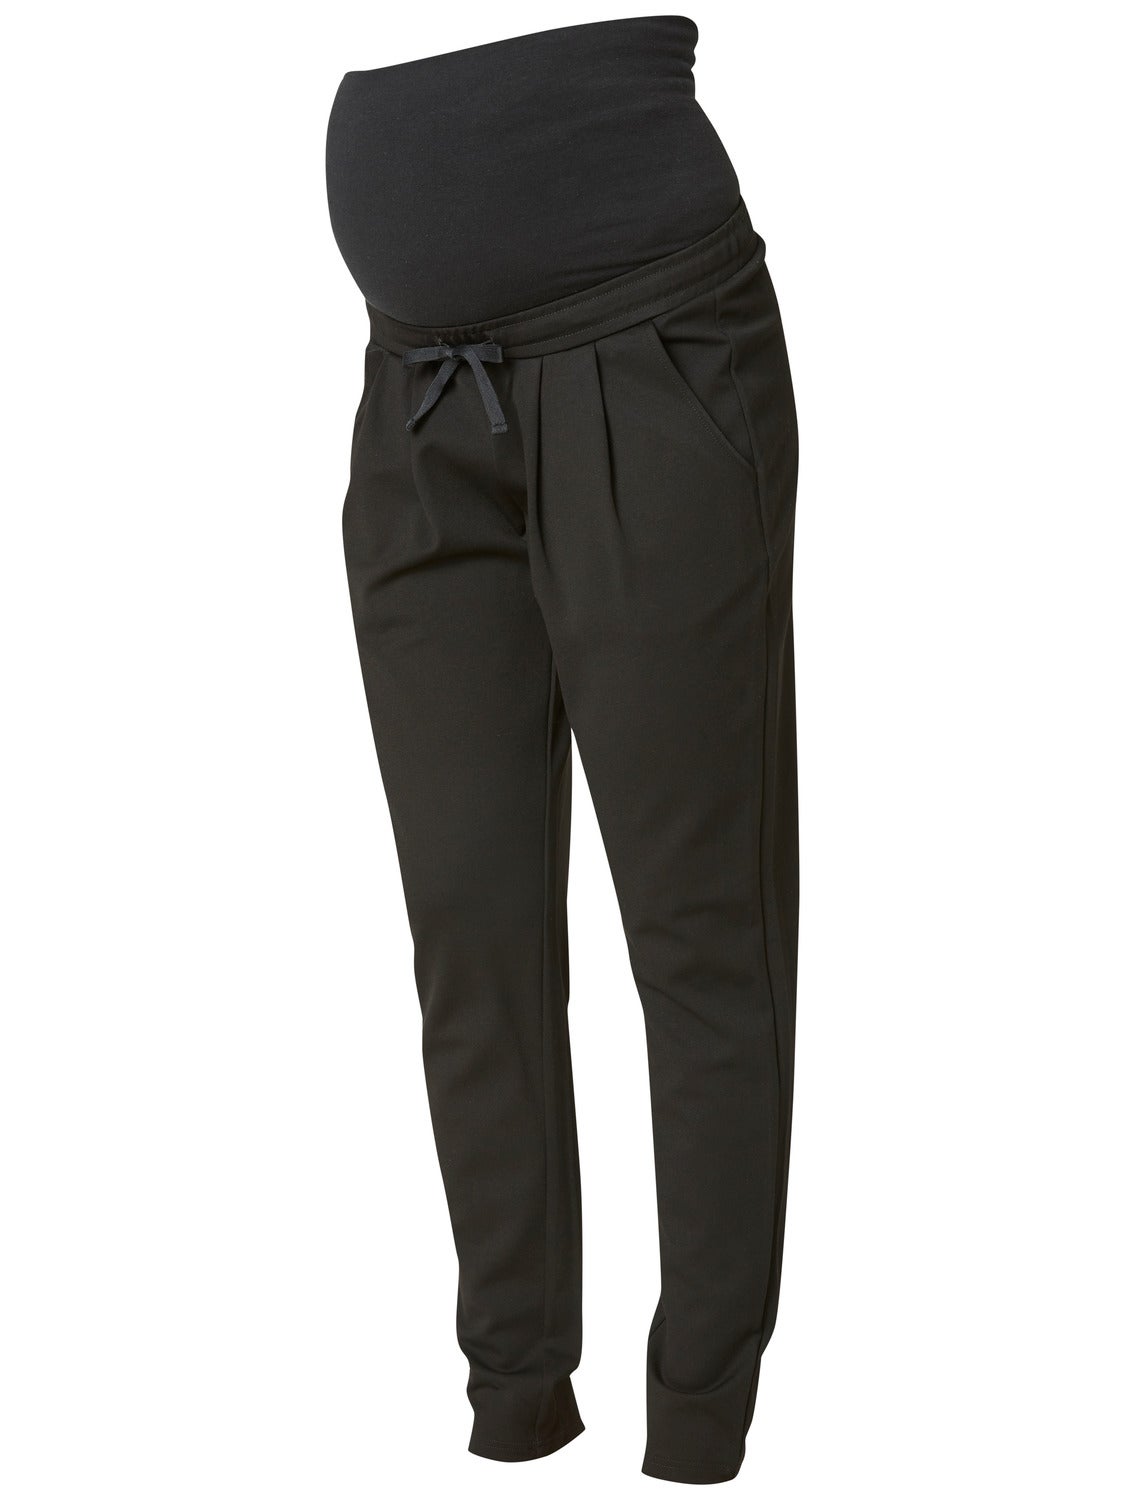 Maternity Trousers & Leggings | Next Official Site